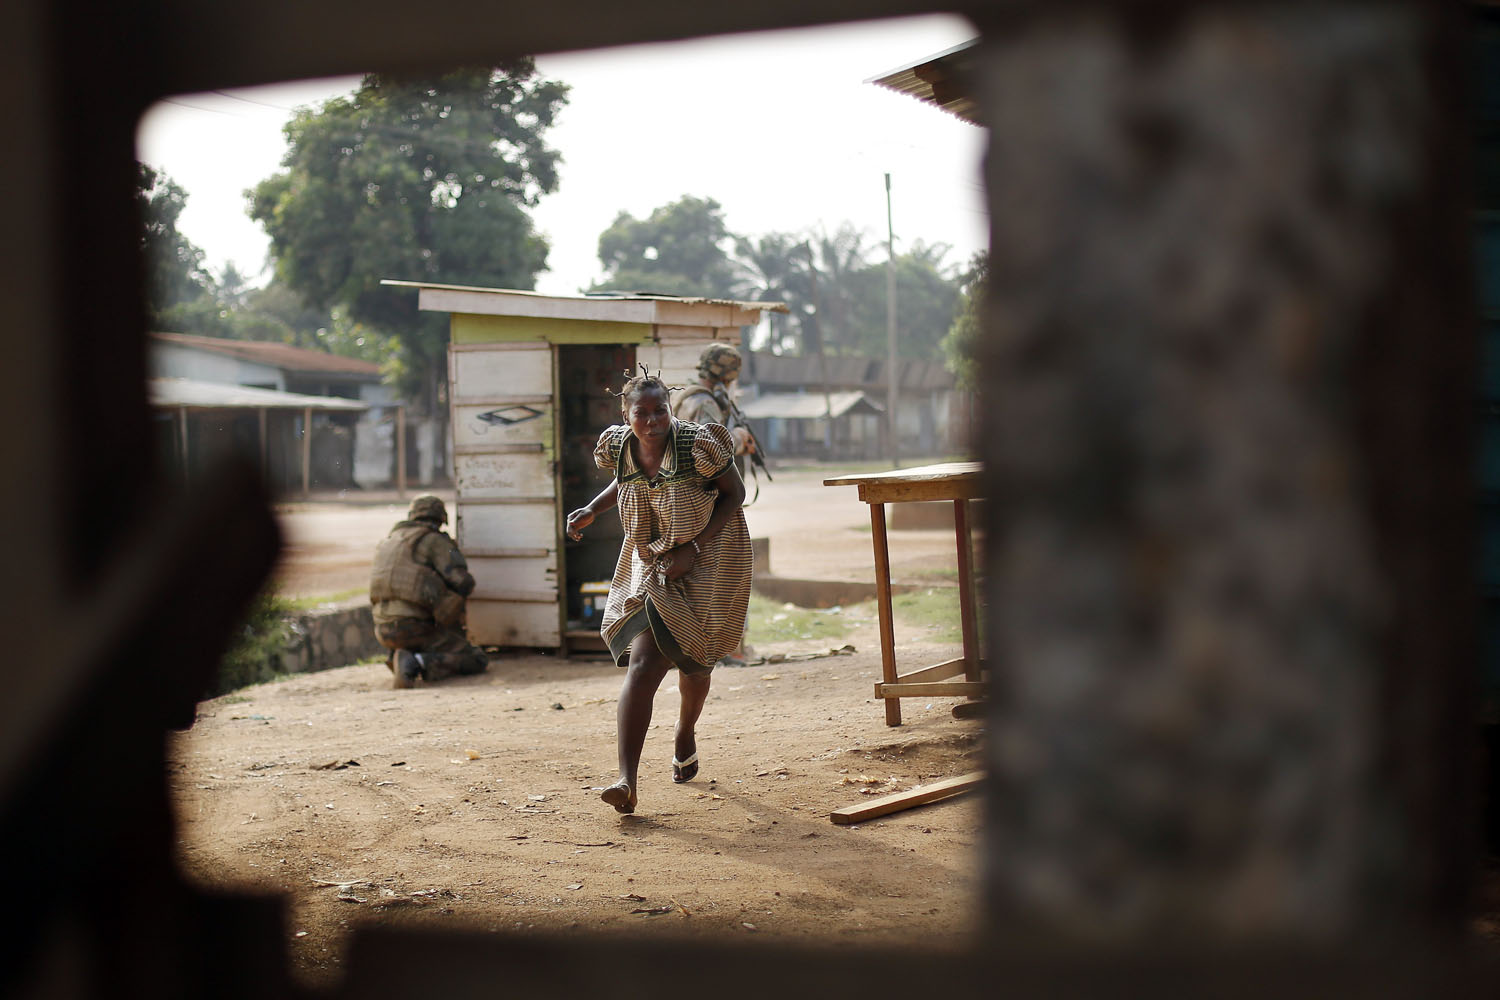 Feb. 3, 2014. A woman runs for cover as heavy gunfire erupts in the Miskin district of Bangui, Central African Republic.